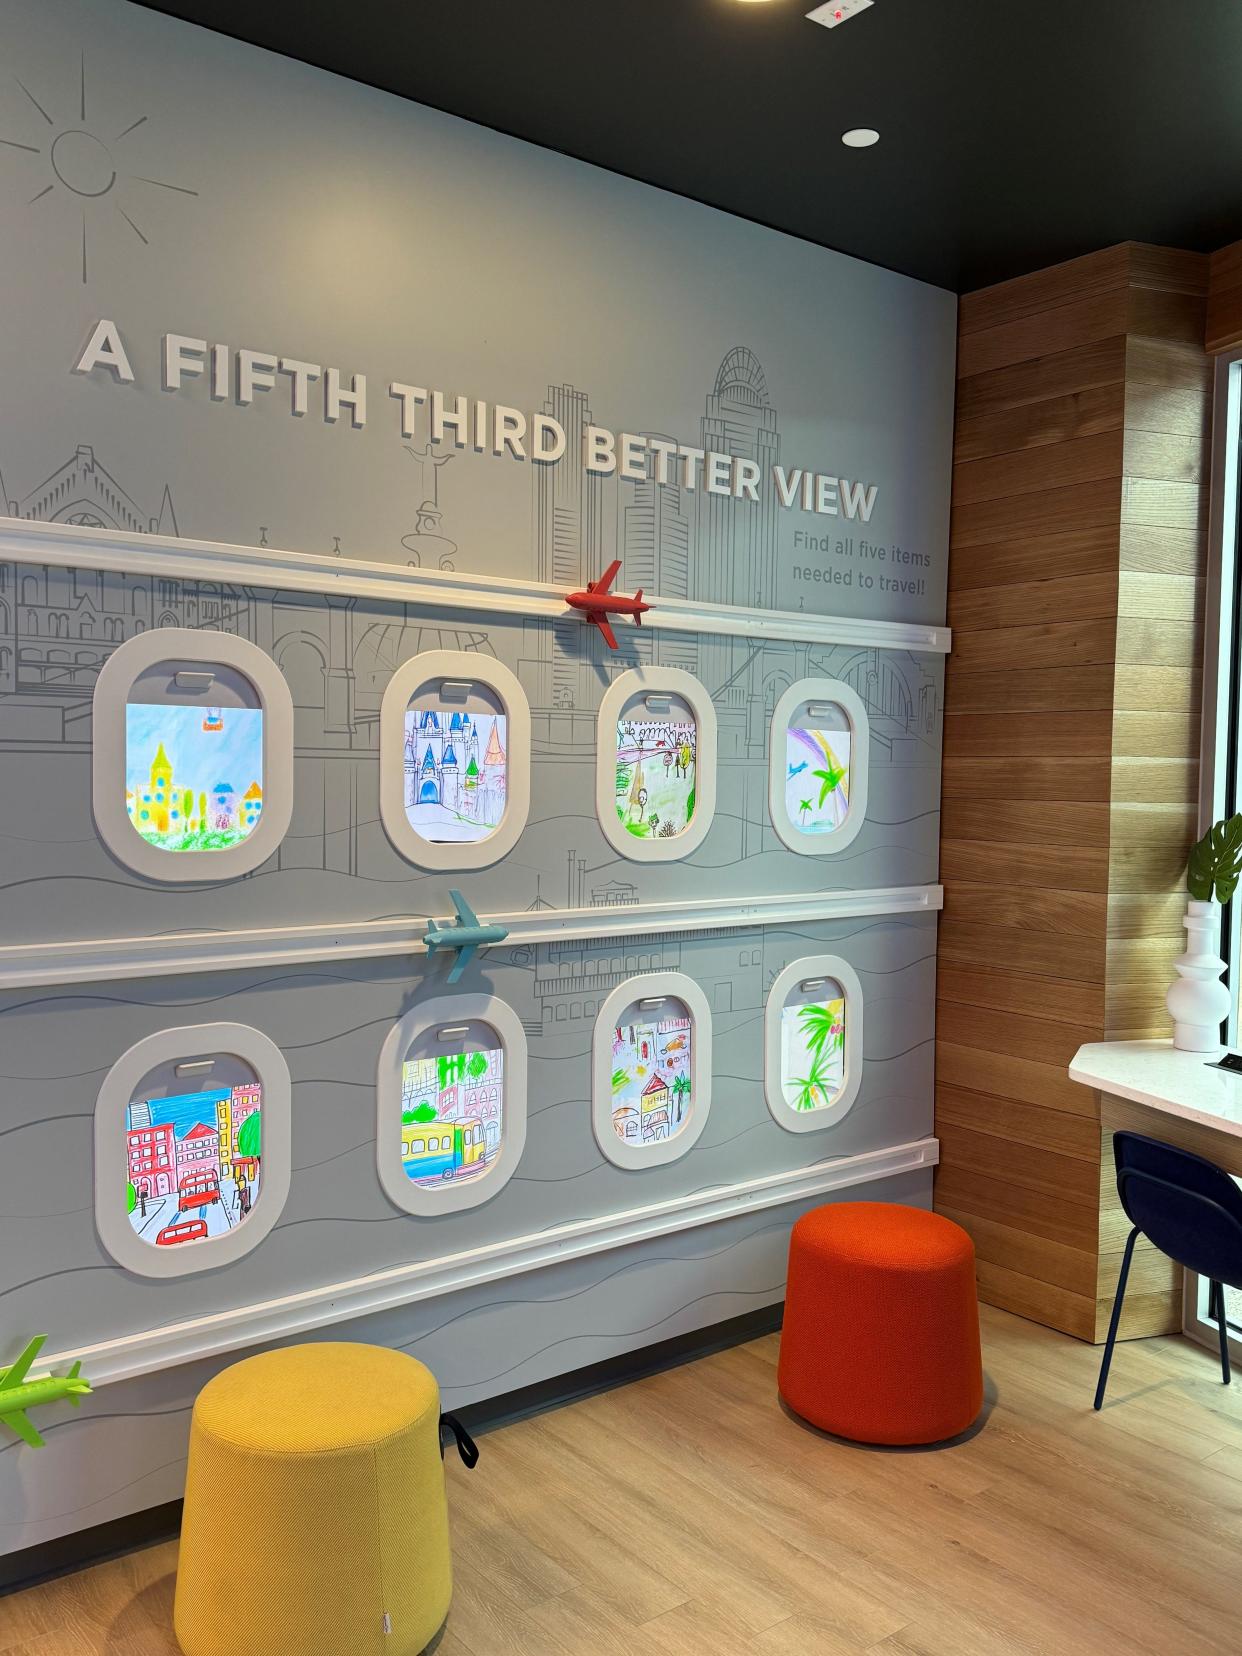 The new branch includes digital installation targeted toward children. Fifth Third wanted the space to foster a sense of community.